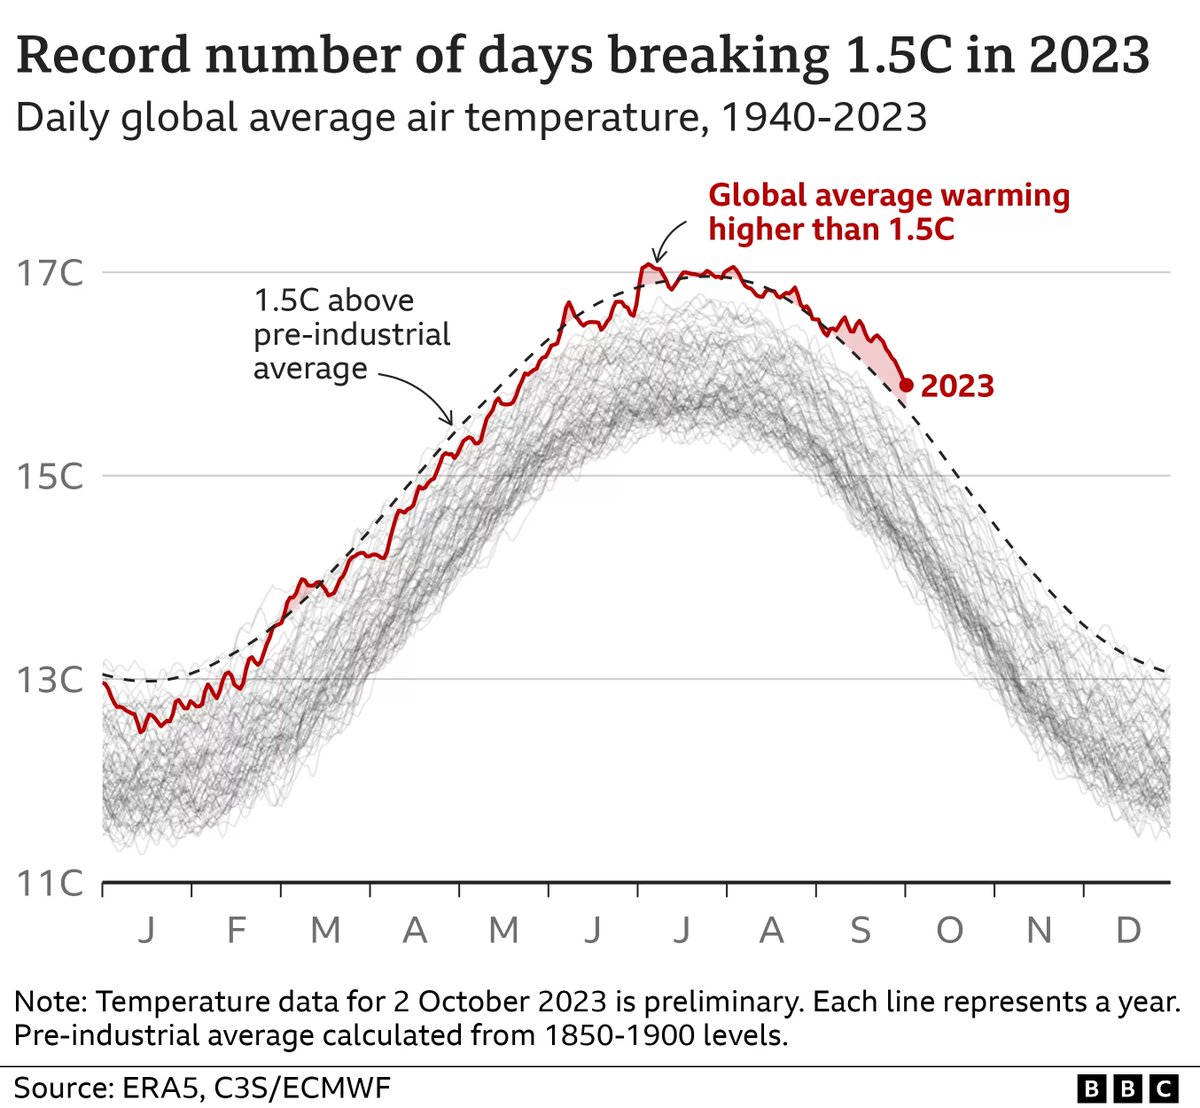 We've breached the key 1.5C warming mark for a record number of days this year, with 2023 on track to be the hottest year on record - until next year Yes, it's because we are burning more and more fossil fuels We must stop this ecocidal madness bbc.com/news/science-e… #climate